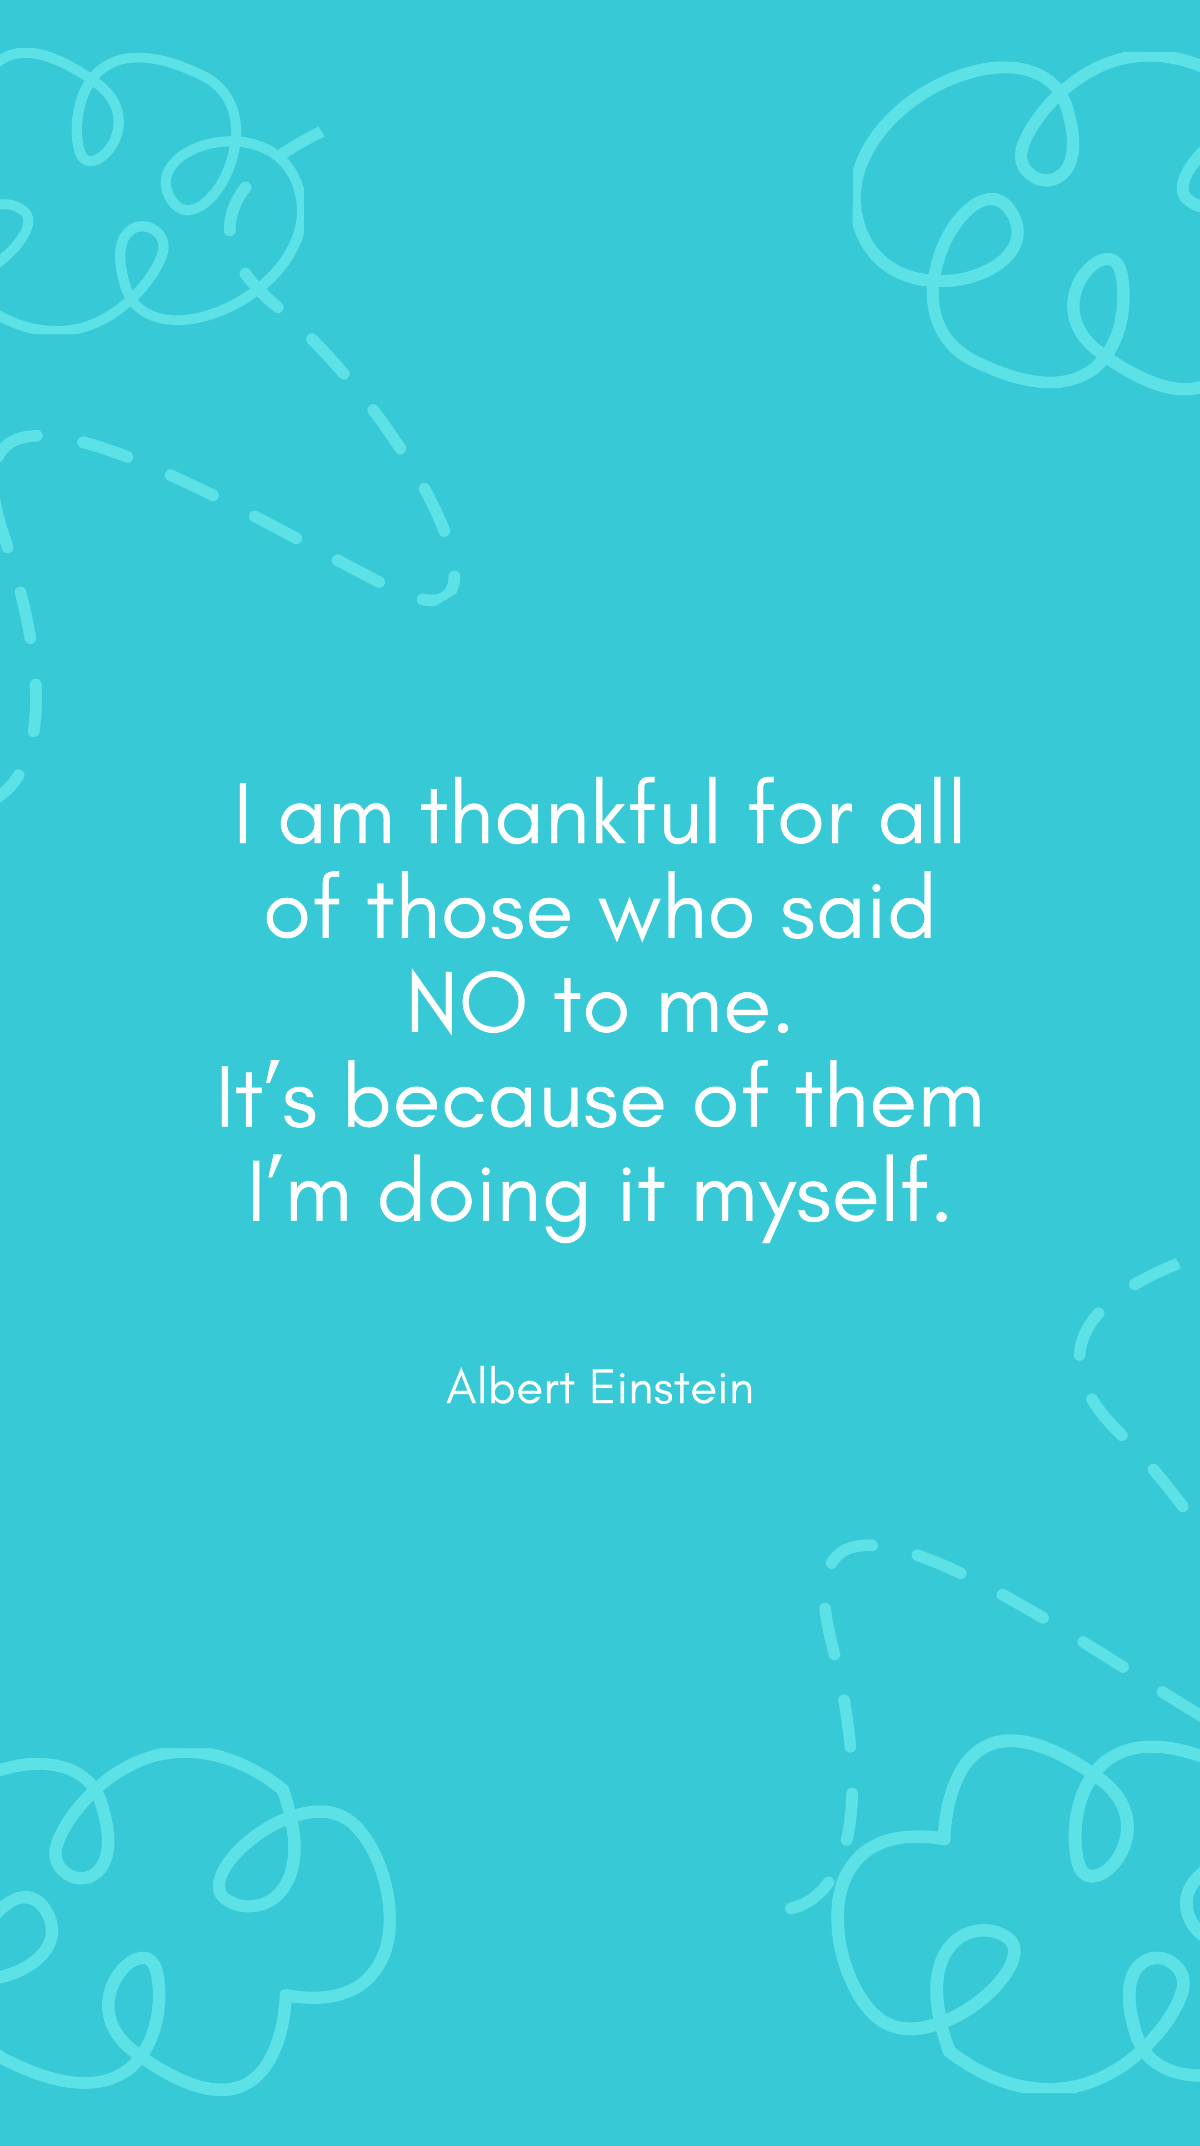 Albert Einstein - I am thankful for all of those who said NO to me. It’s because of them I’m doing it myself. Template